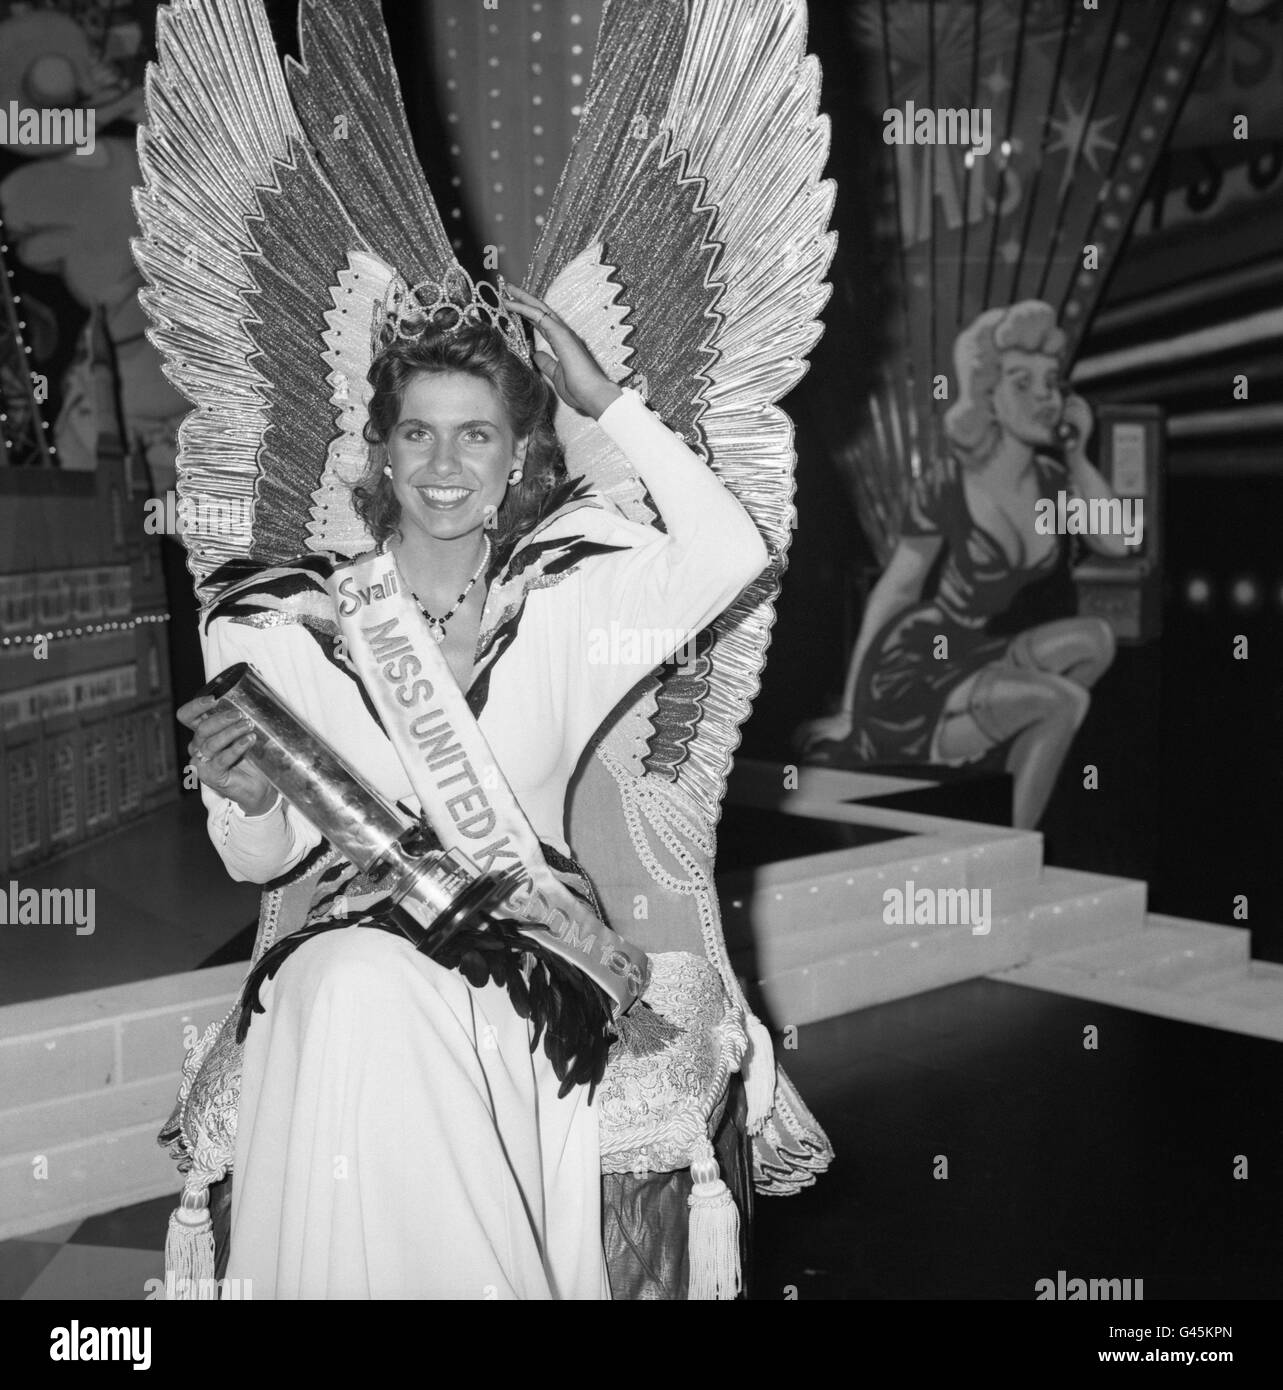 Alison Slack from Worksop who was crowned Miss United Kingdom 1986 at the Wembley Conference Centre, London. Stock Photo